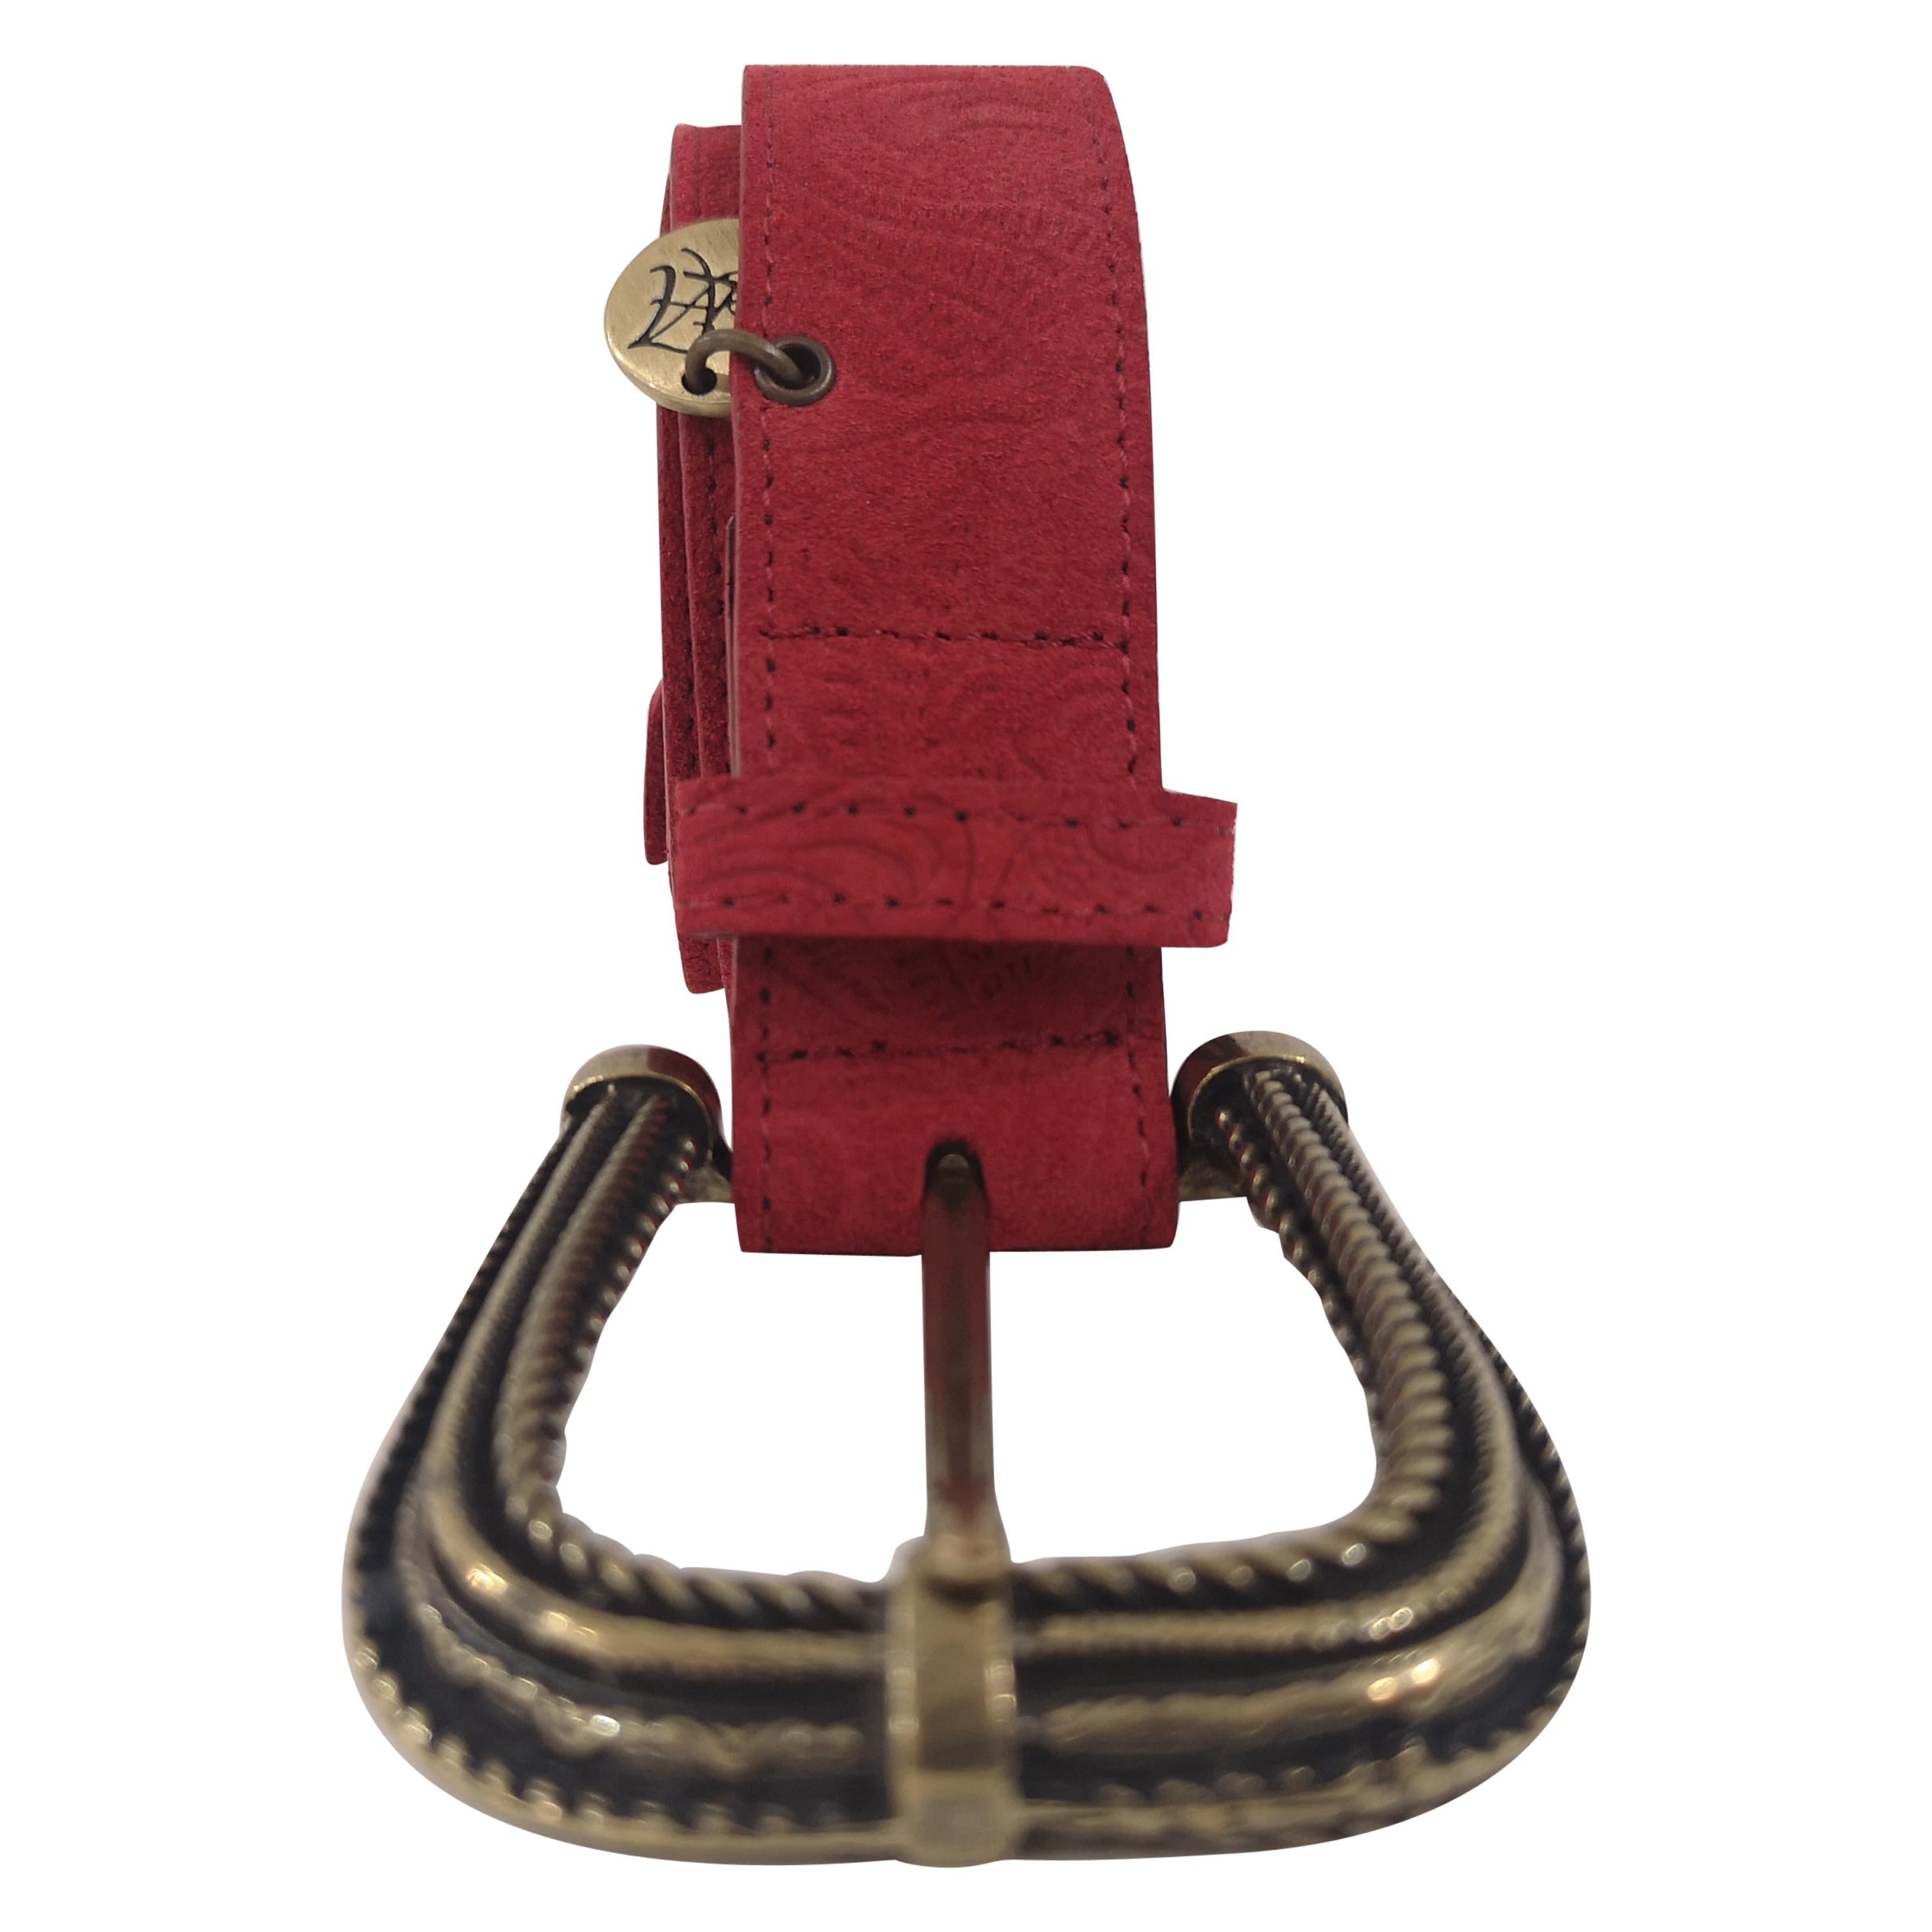 Red leather suede belt NWOT